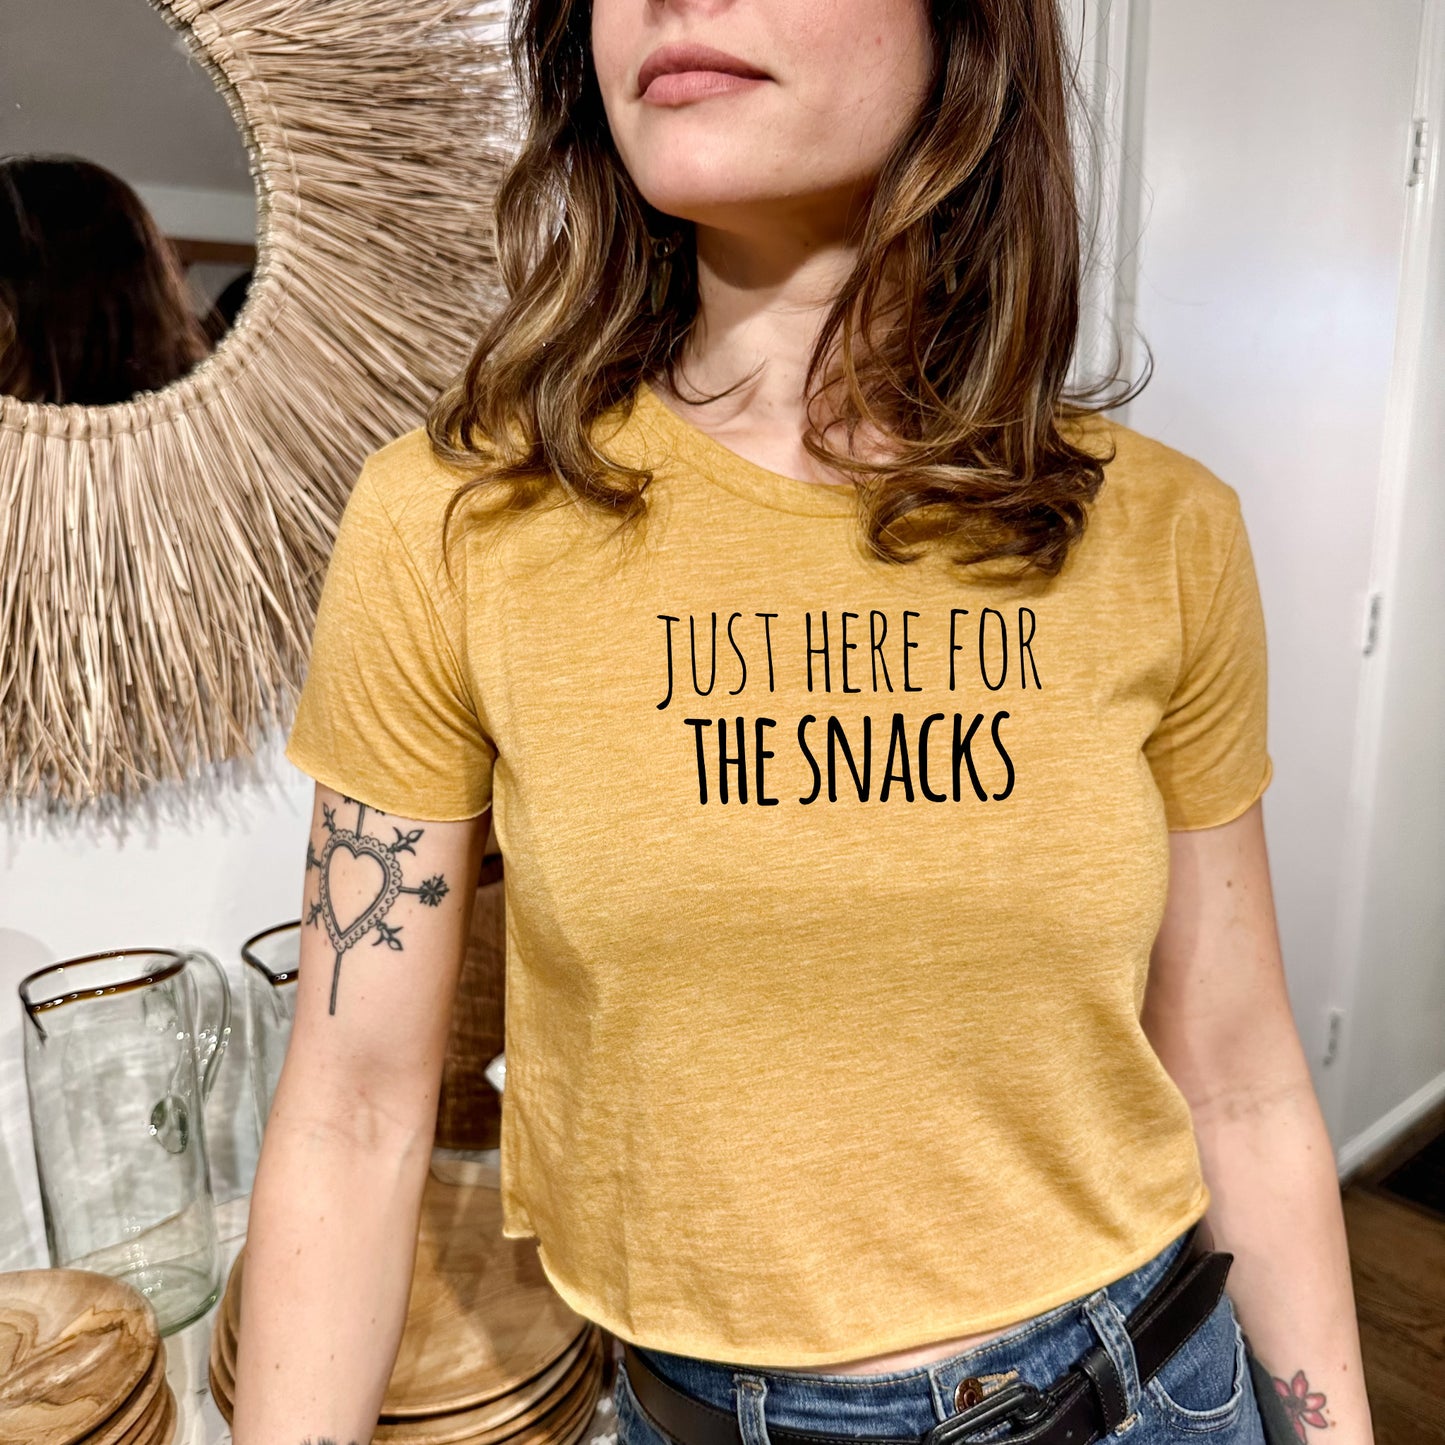 Just Here For The Snacks - Women's Crop Tee - Heather Gray or Gold